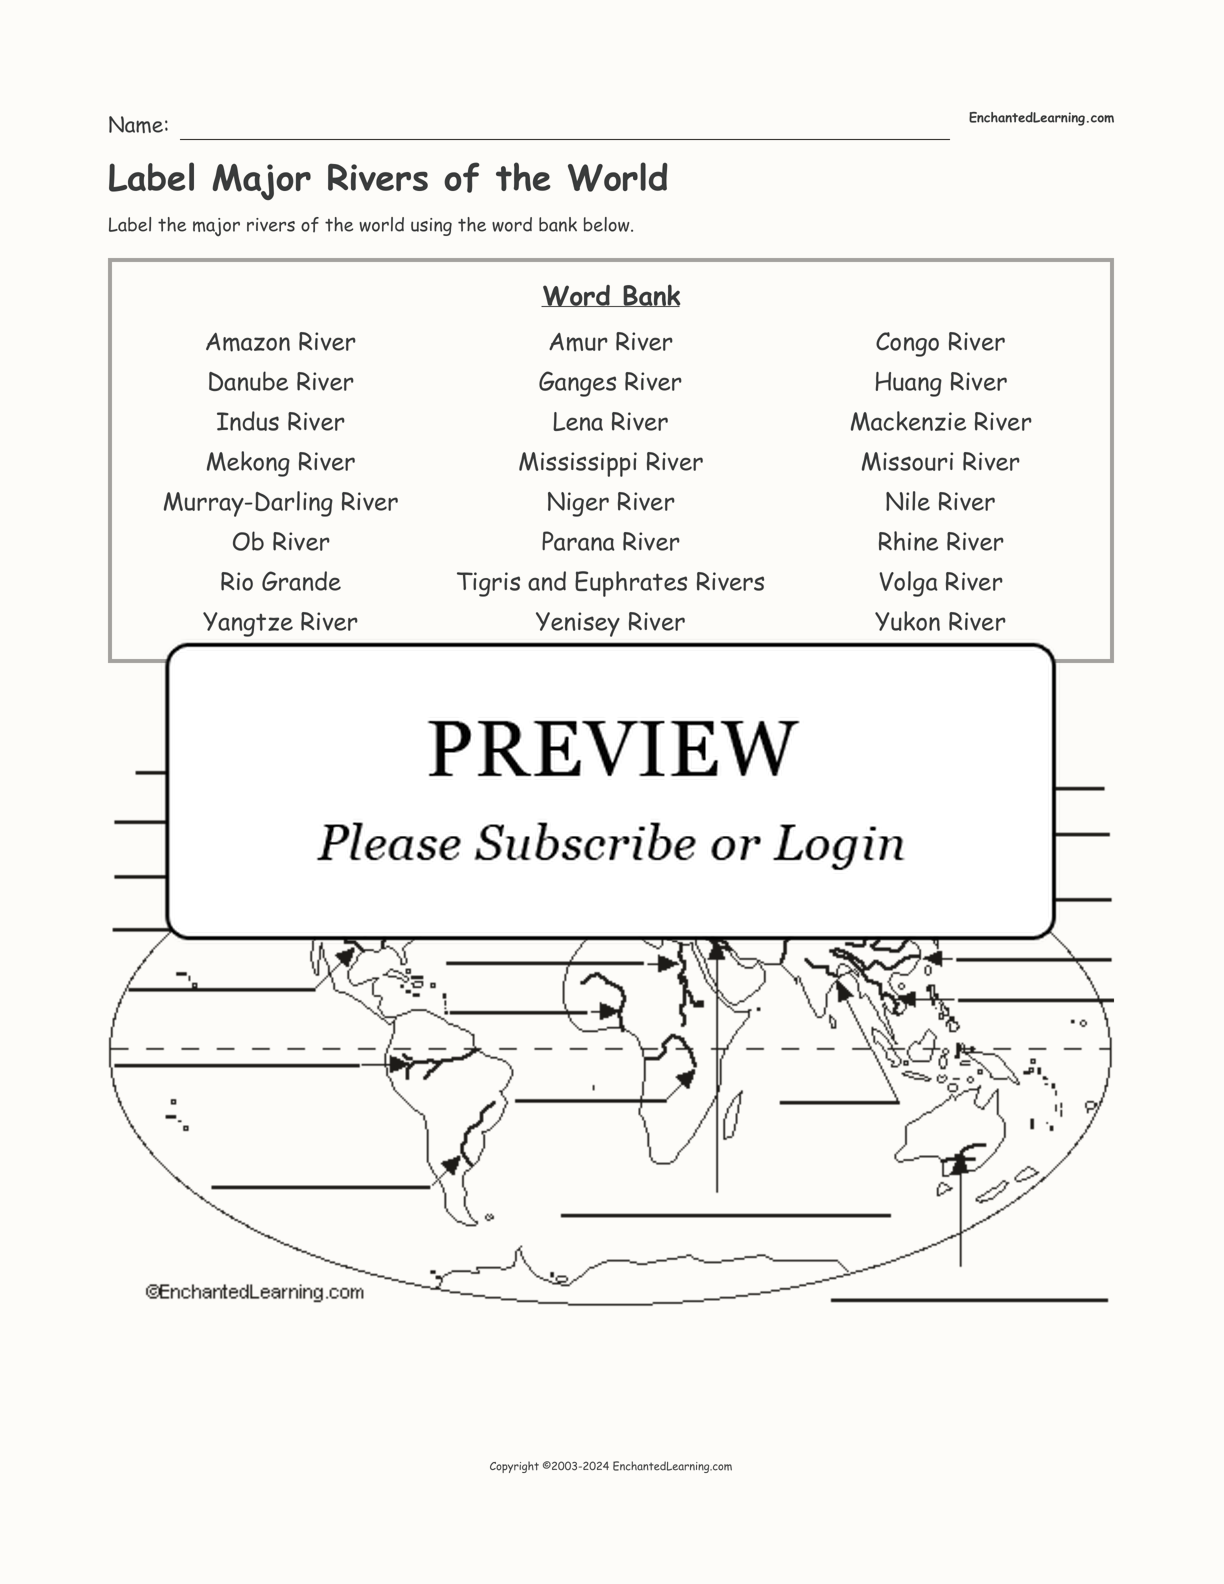 Label Major Rivers of the World interactive worksheet page 1